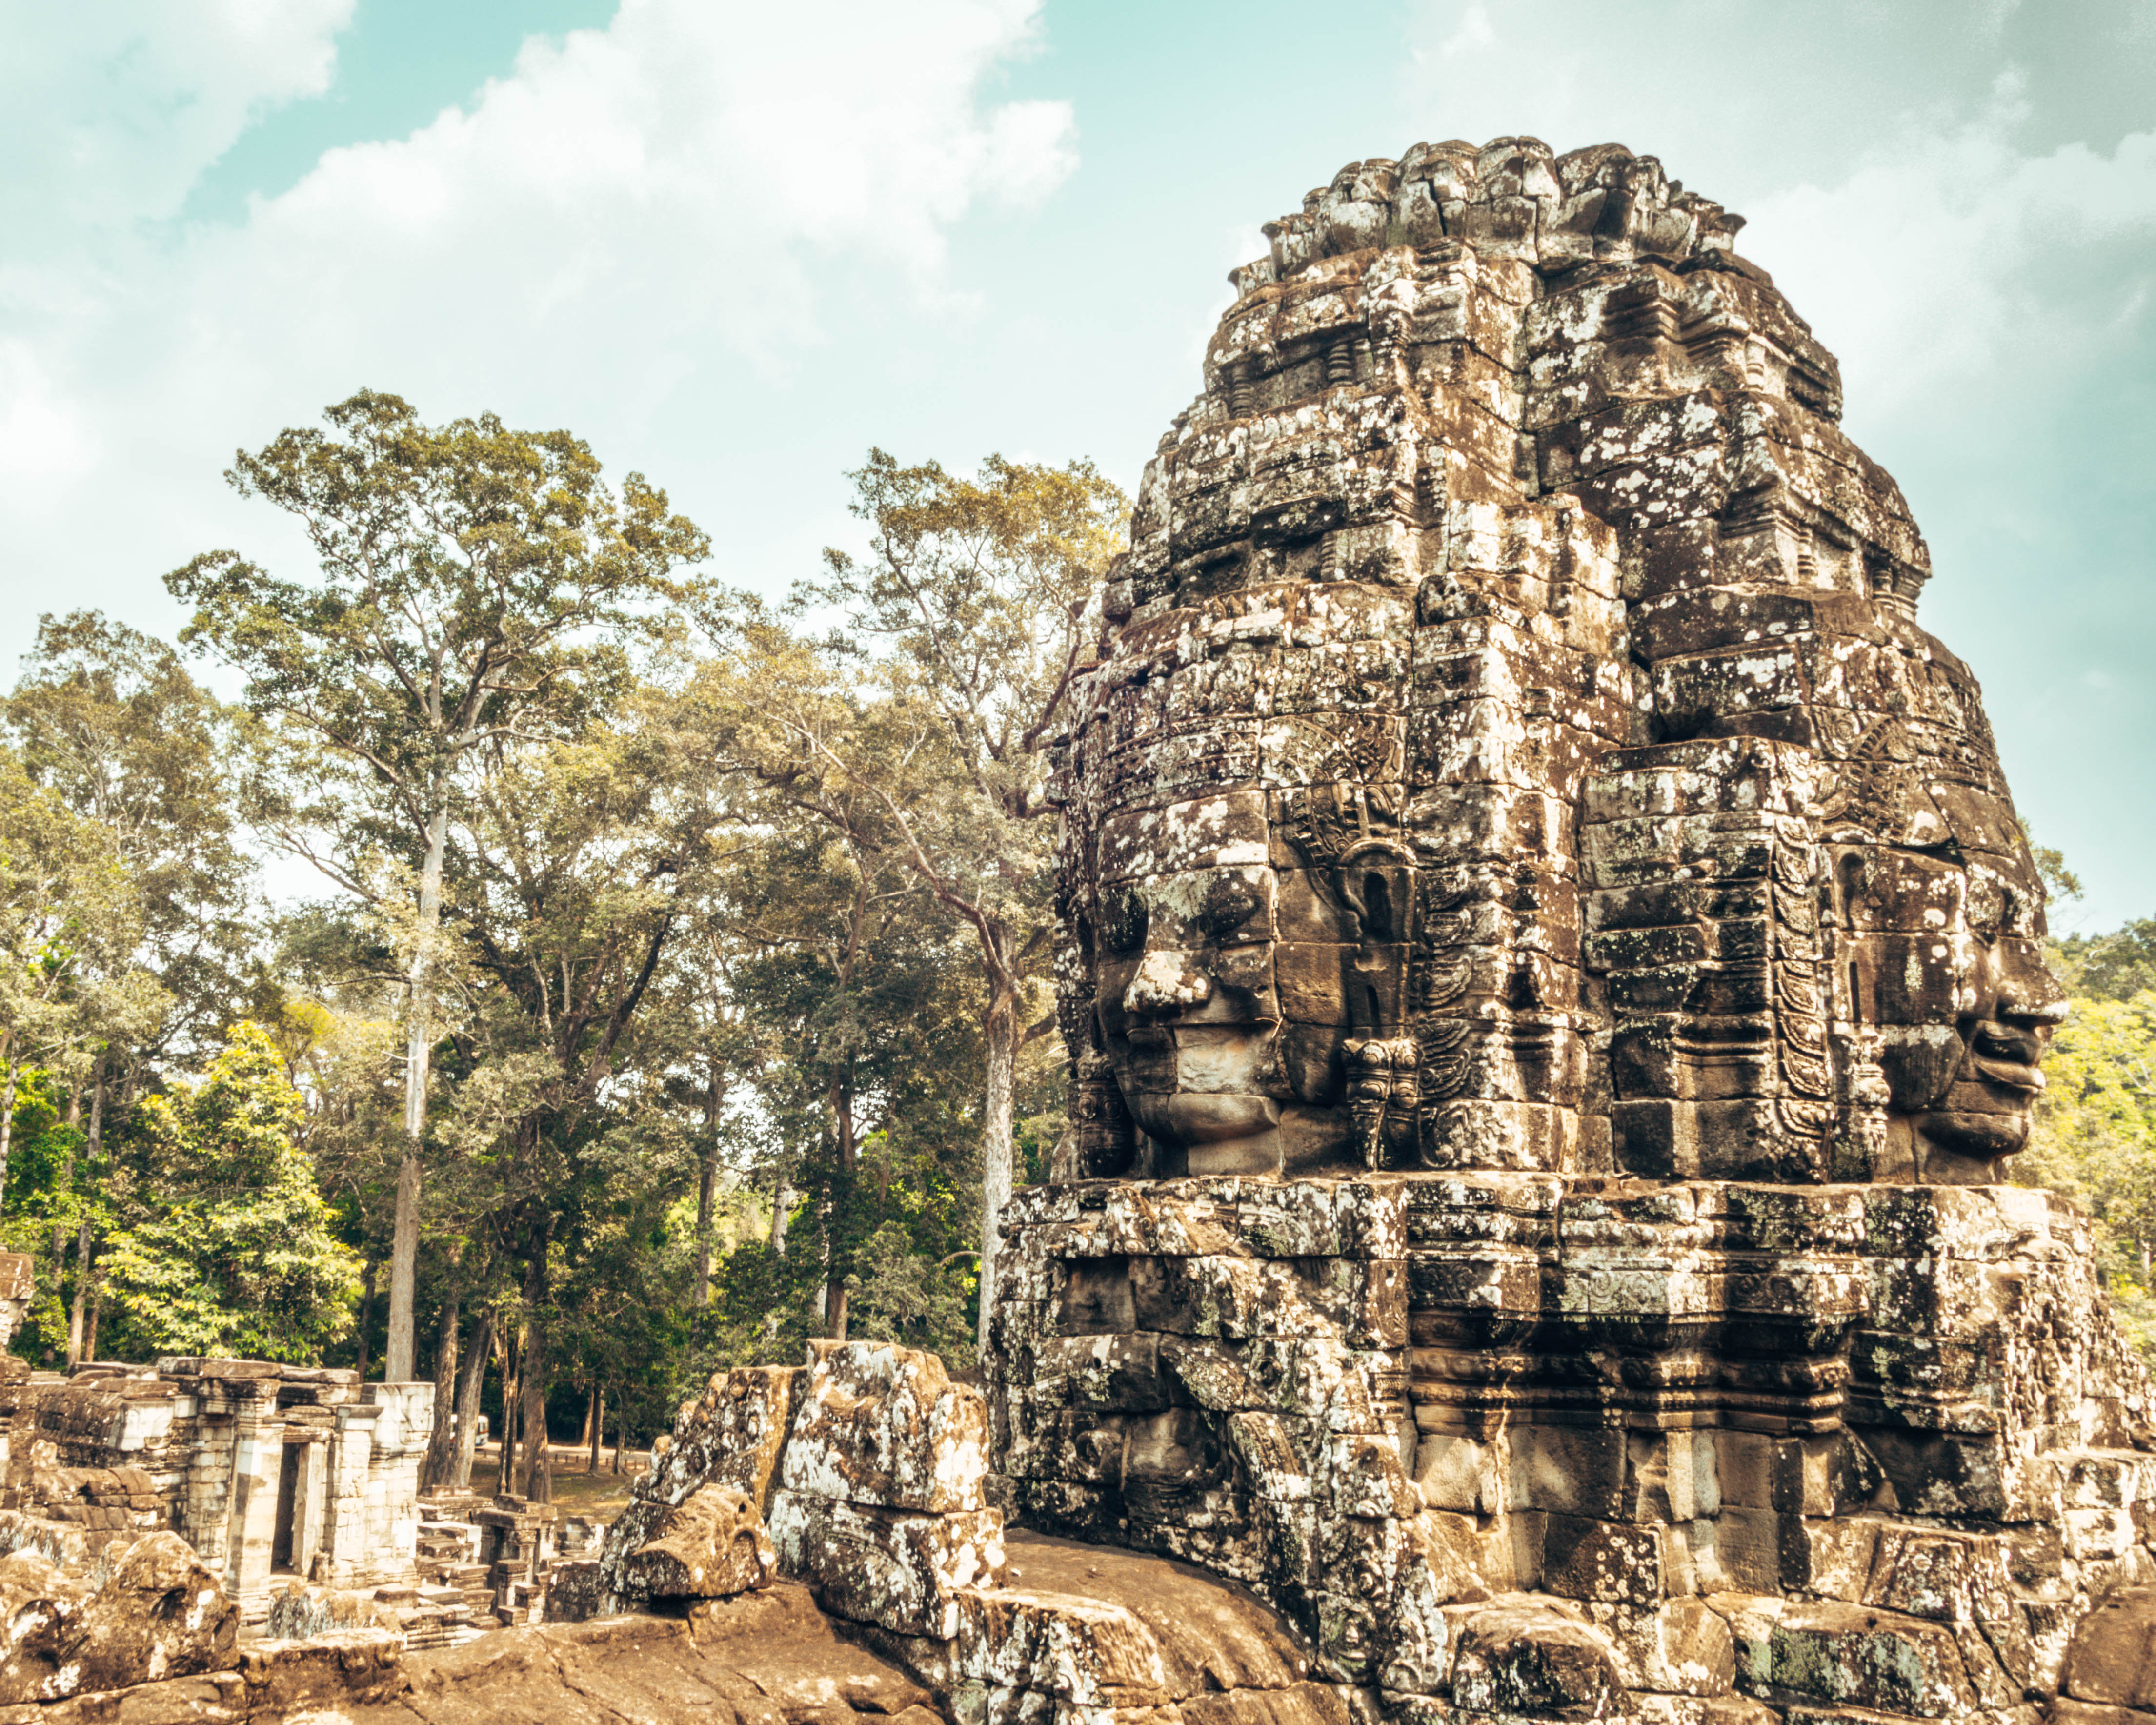 The face structures of Bayon temple - Best tips before visiting Angkor Wat Temples - wediditourway.com